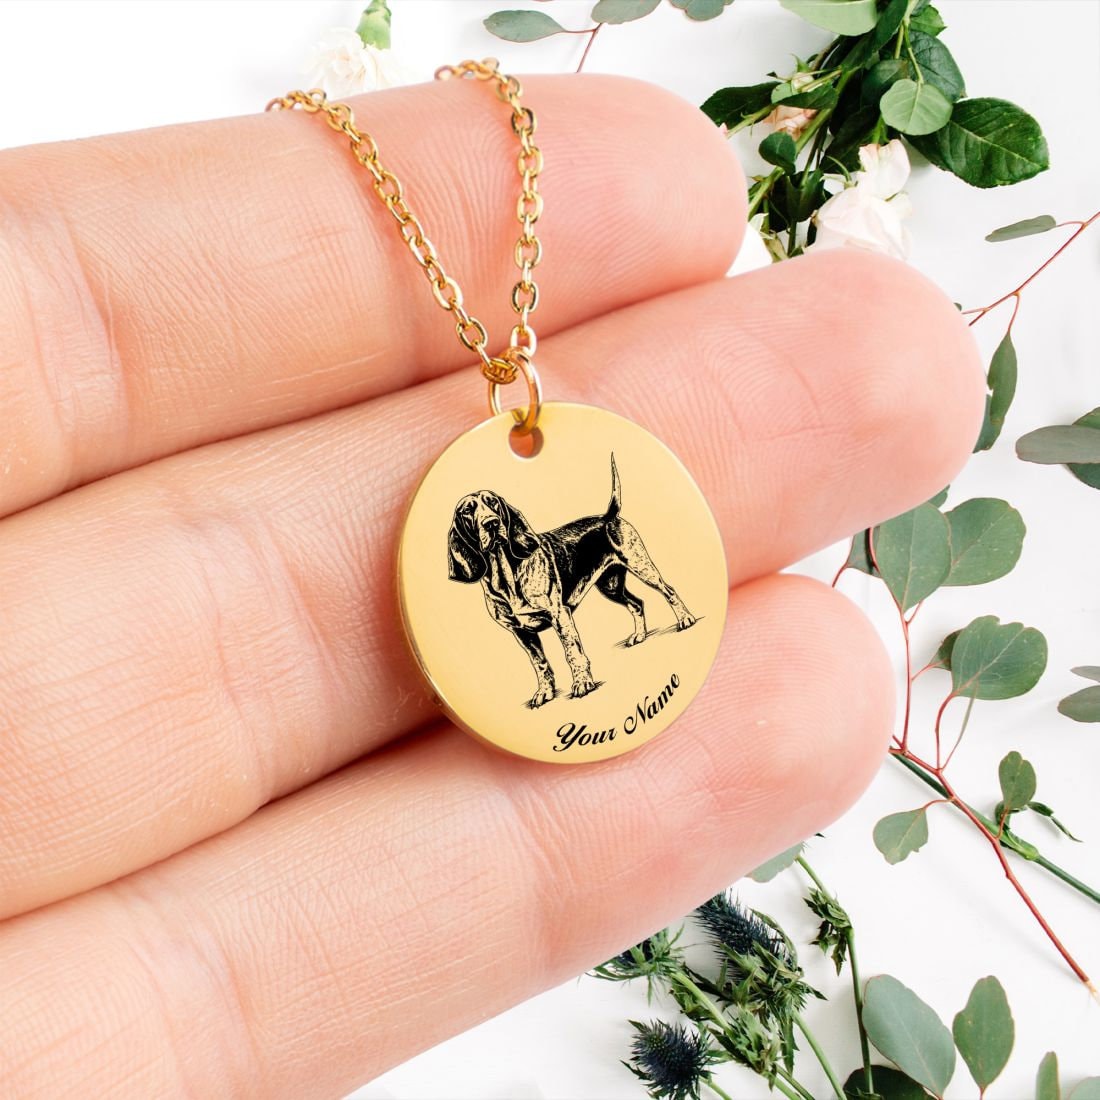 Coonhound Dog Portrait Necklace - Personalizable Jewelry